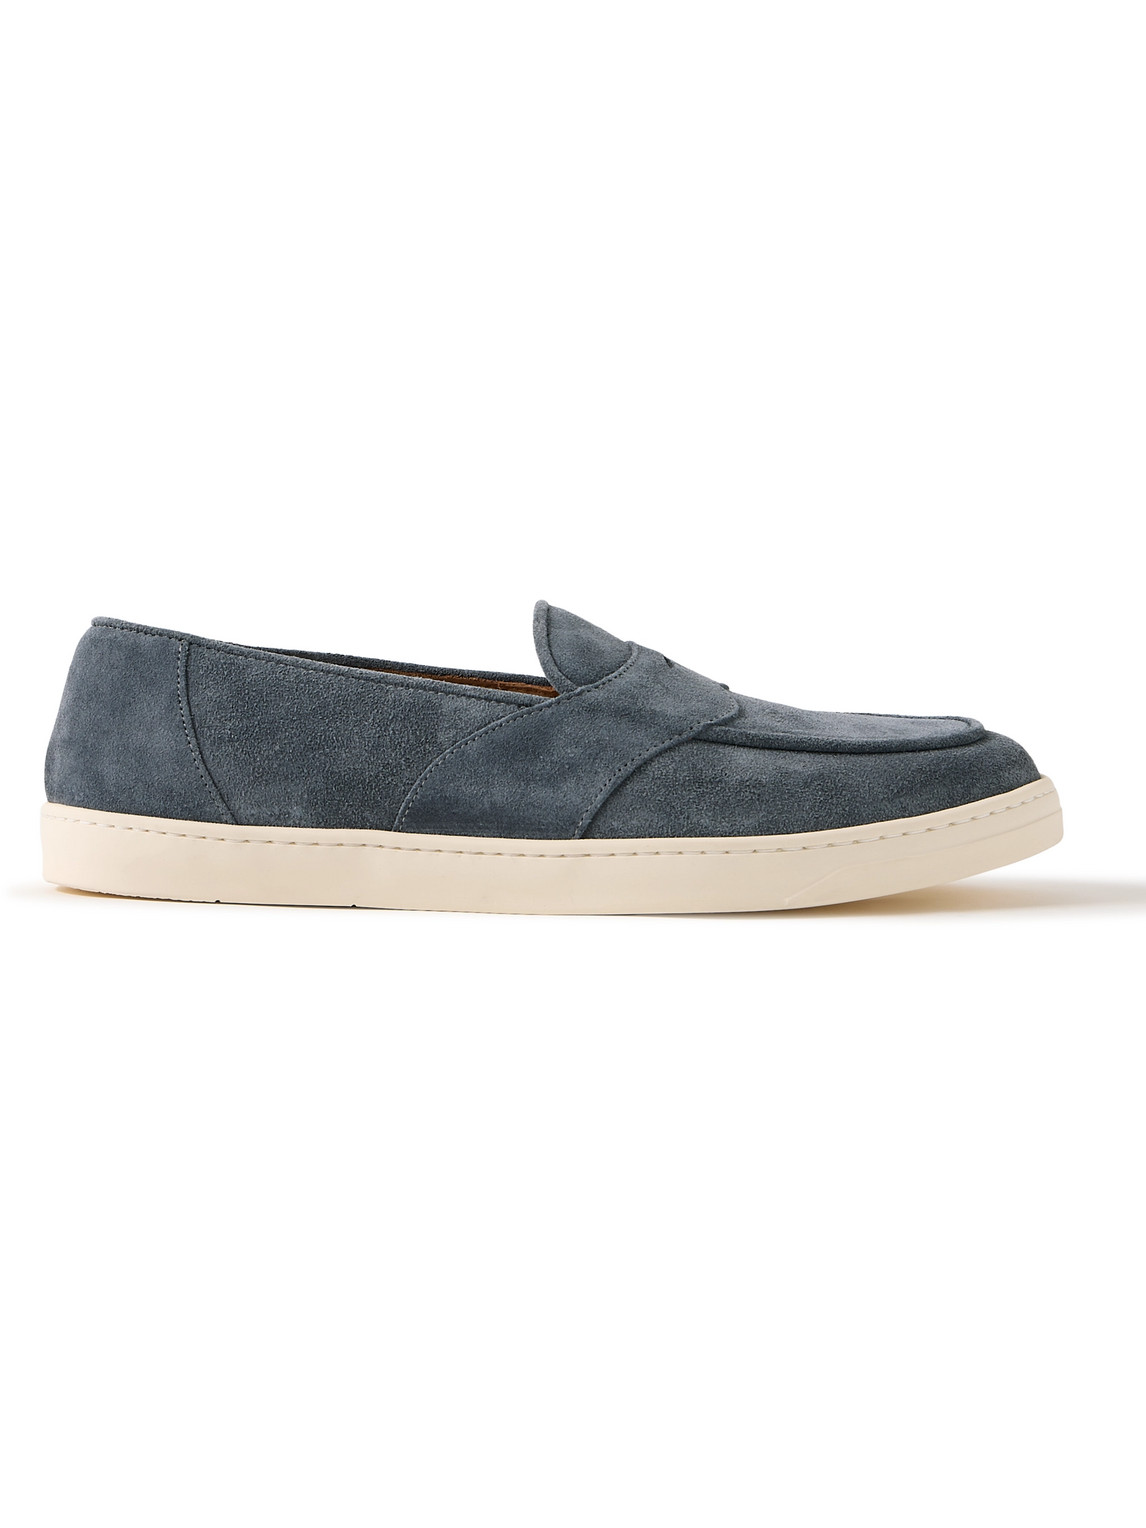 George Cleverley Joey Suede Penny Loafers In Blue